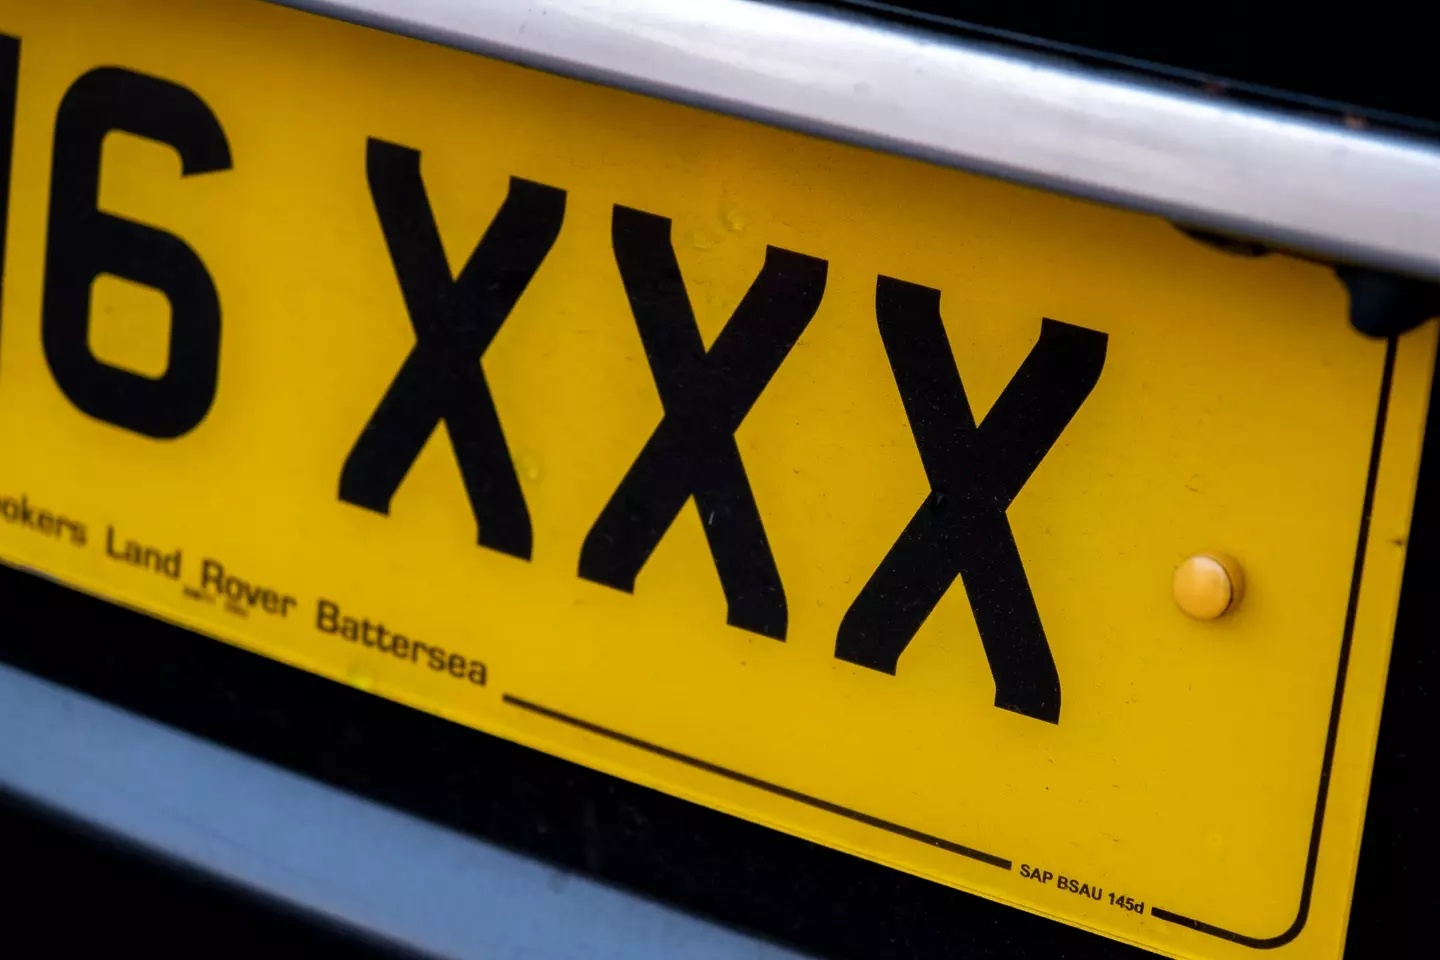 The DVLA doesn't want you using your car number plate to say naughty things.